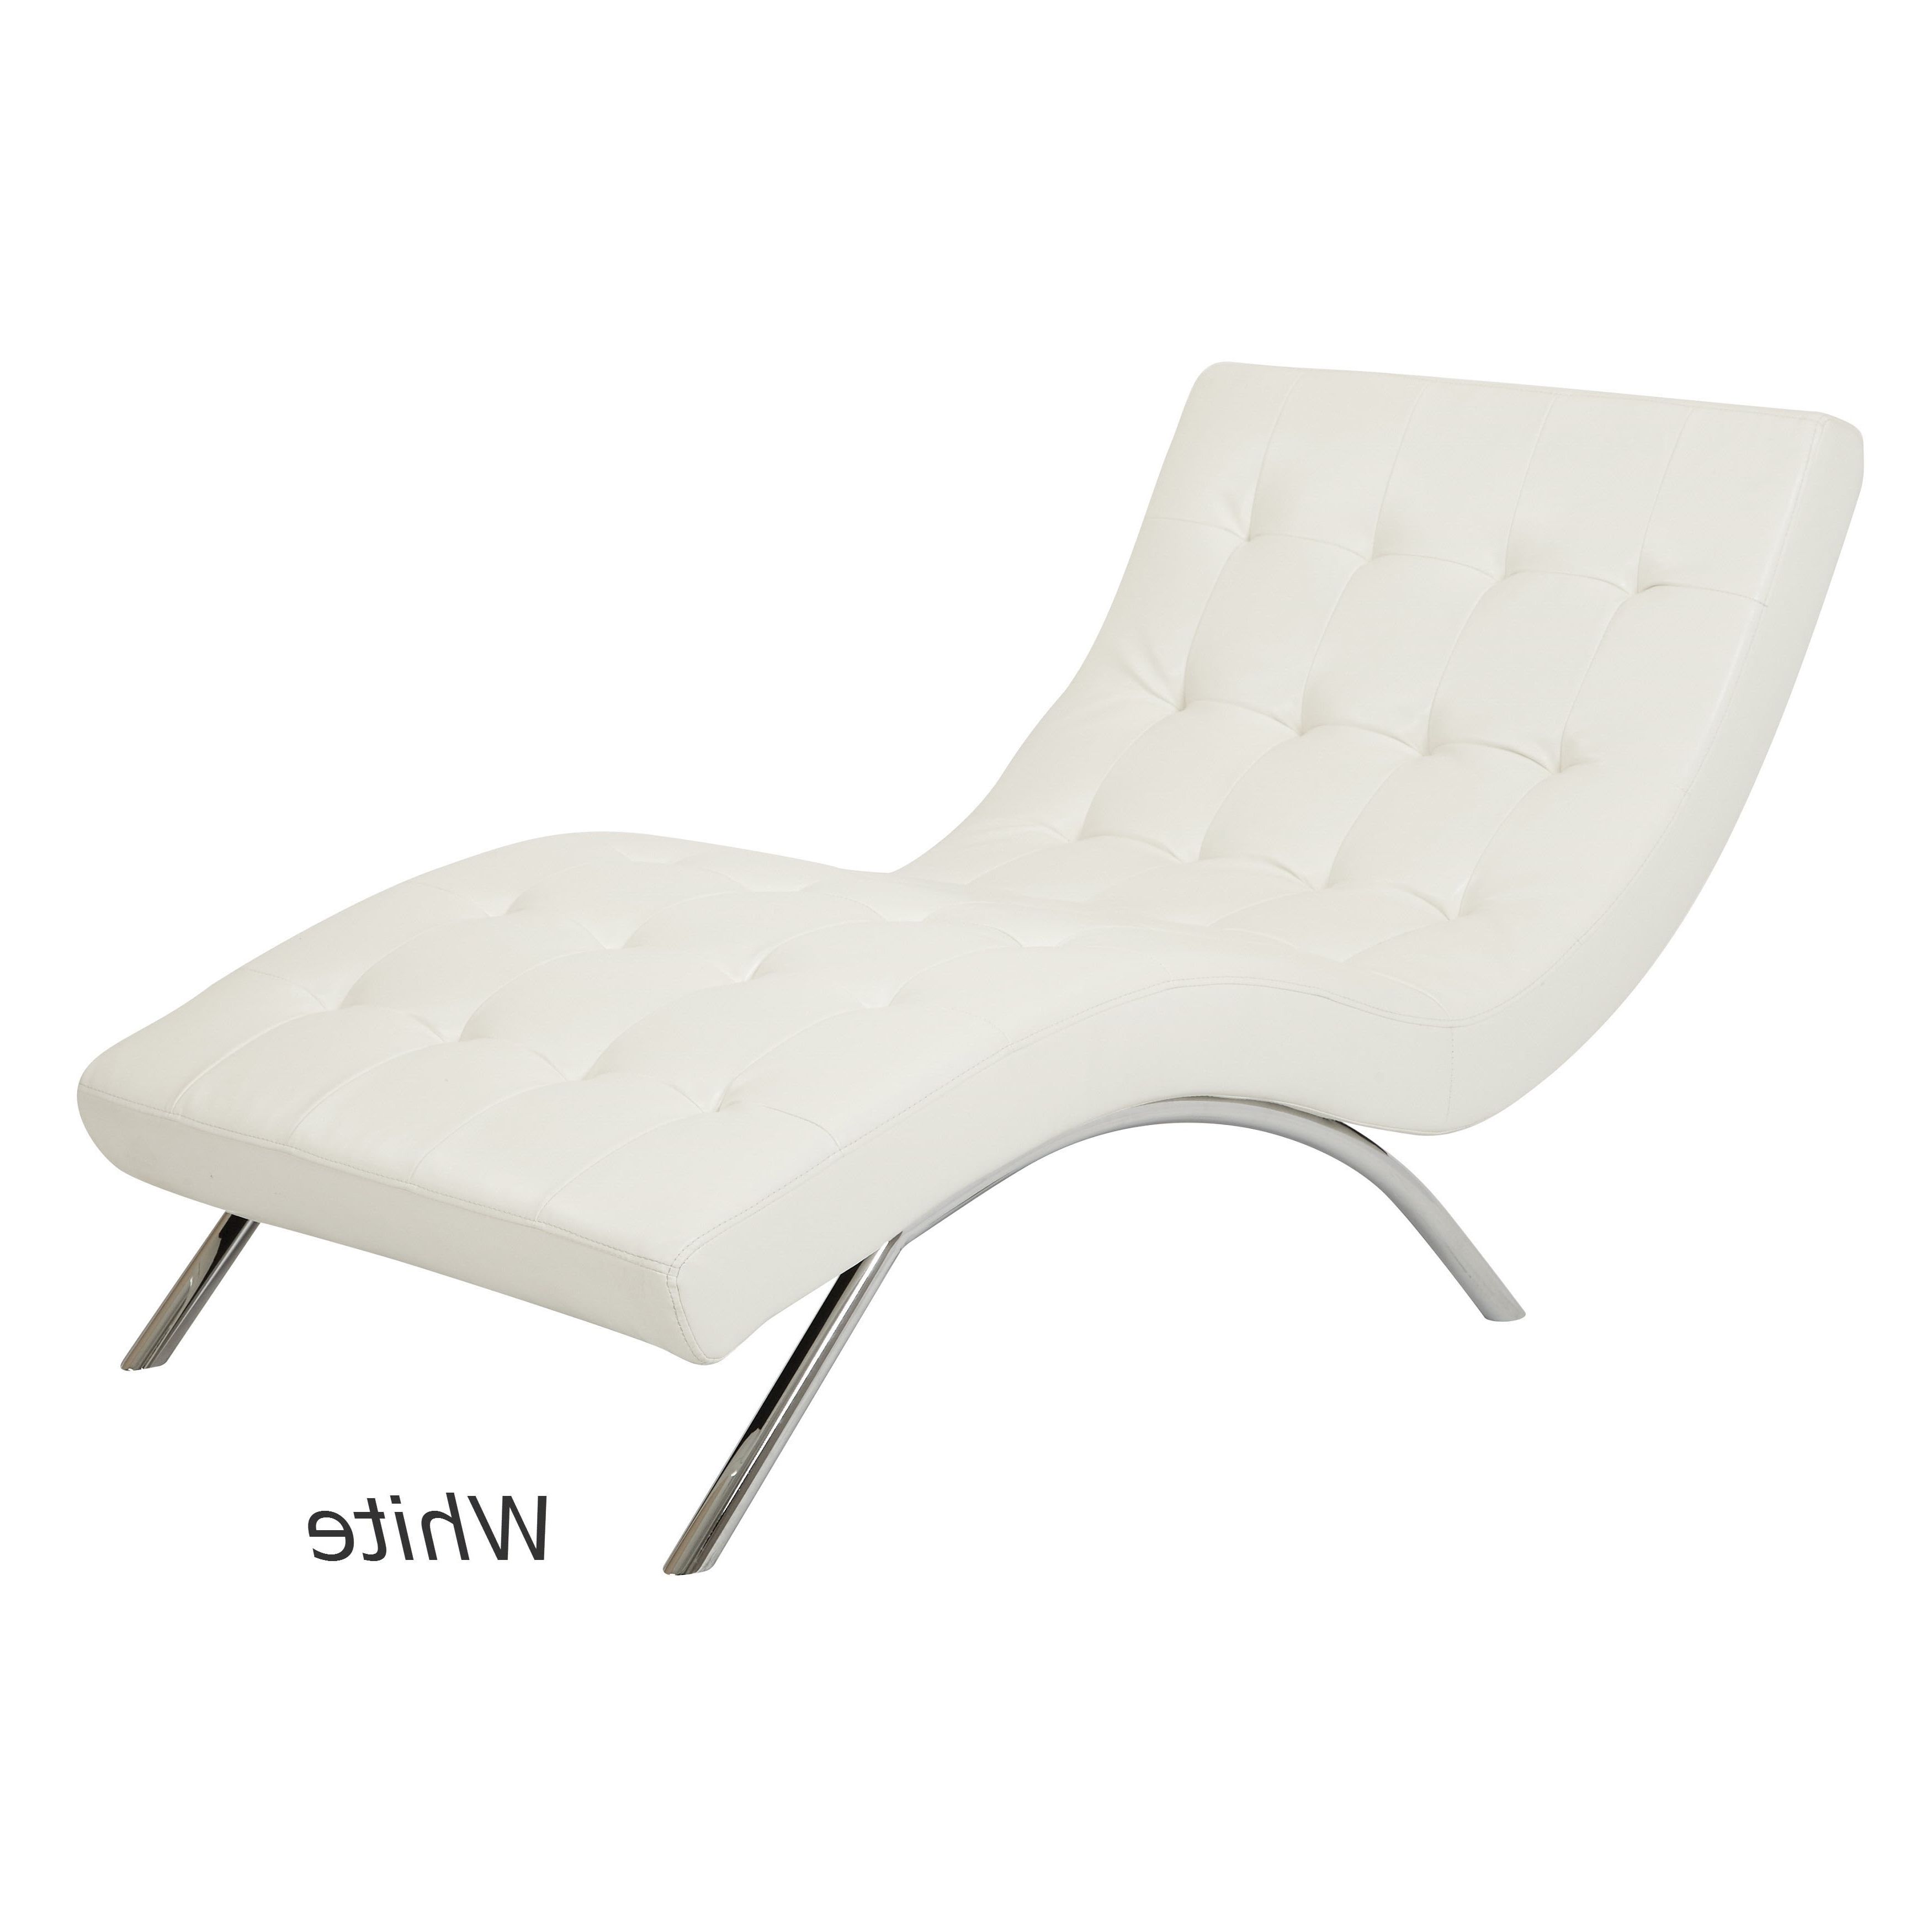 Tufted Chaise Lounge Chairs Within Newest Ave Six Blake Tufted Chaise Lounge Chair In Faux Leather – Free (View 15 of 15)